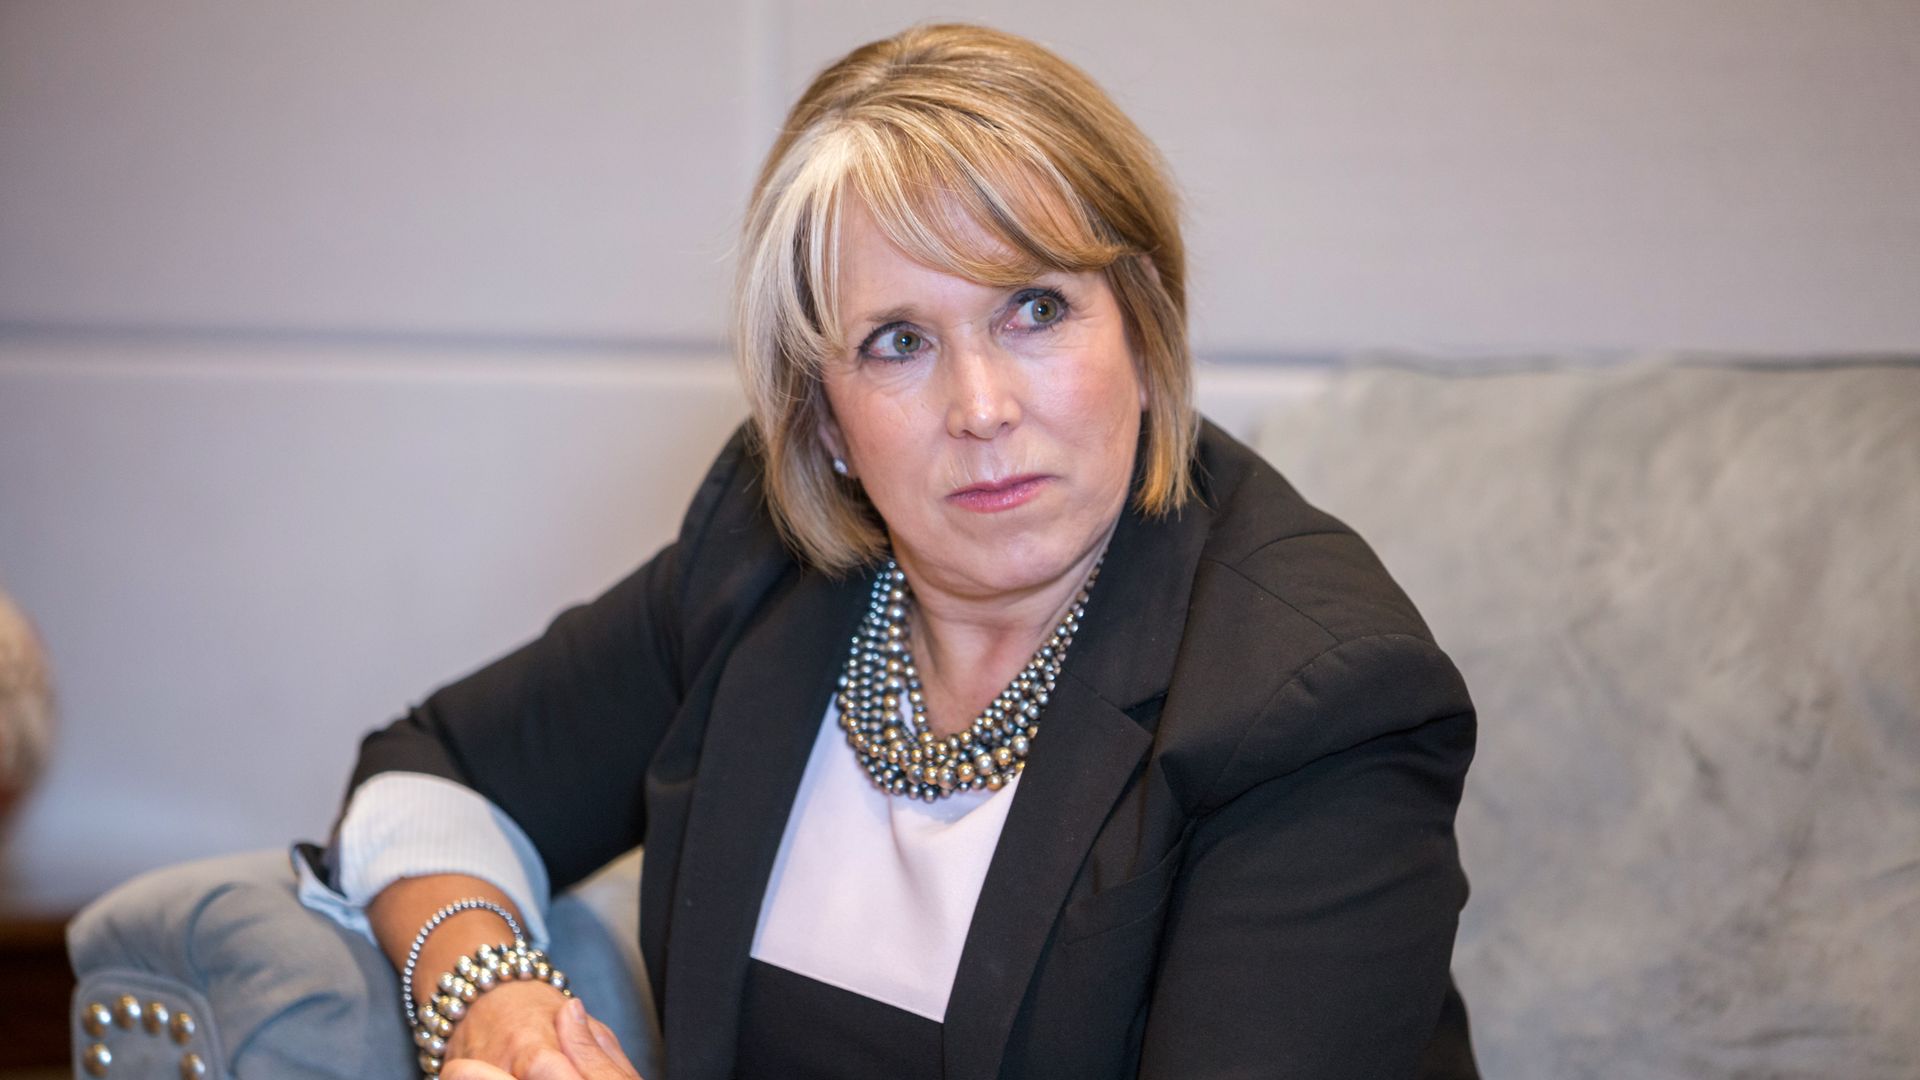 Michelle Lujan Grisham, governor of New Mexico, listens during an interview at her office in Santa Fe, New Mexico, U.S., on Thursday, Aug. 8, 2019.